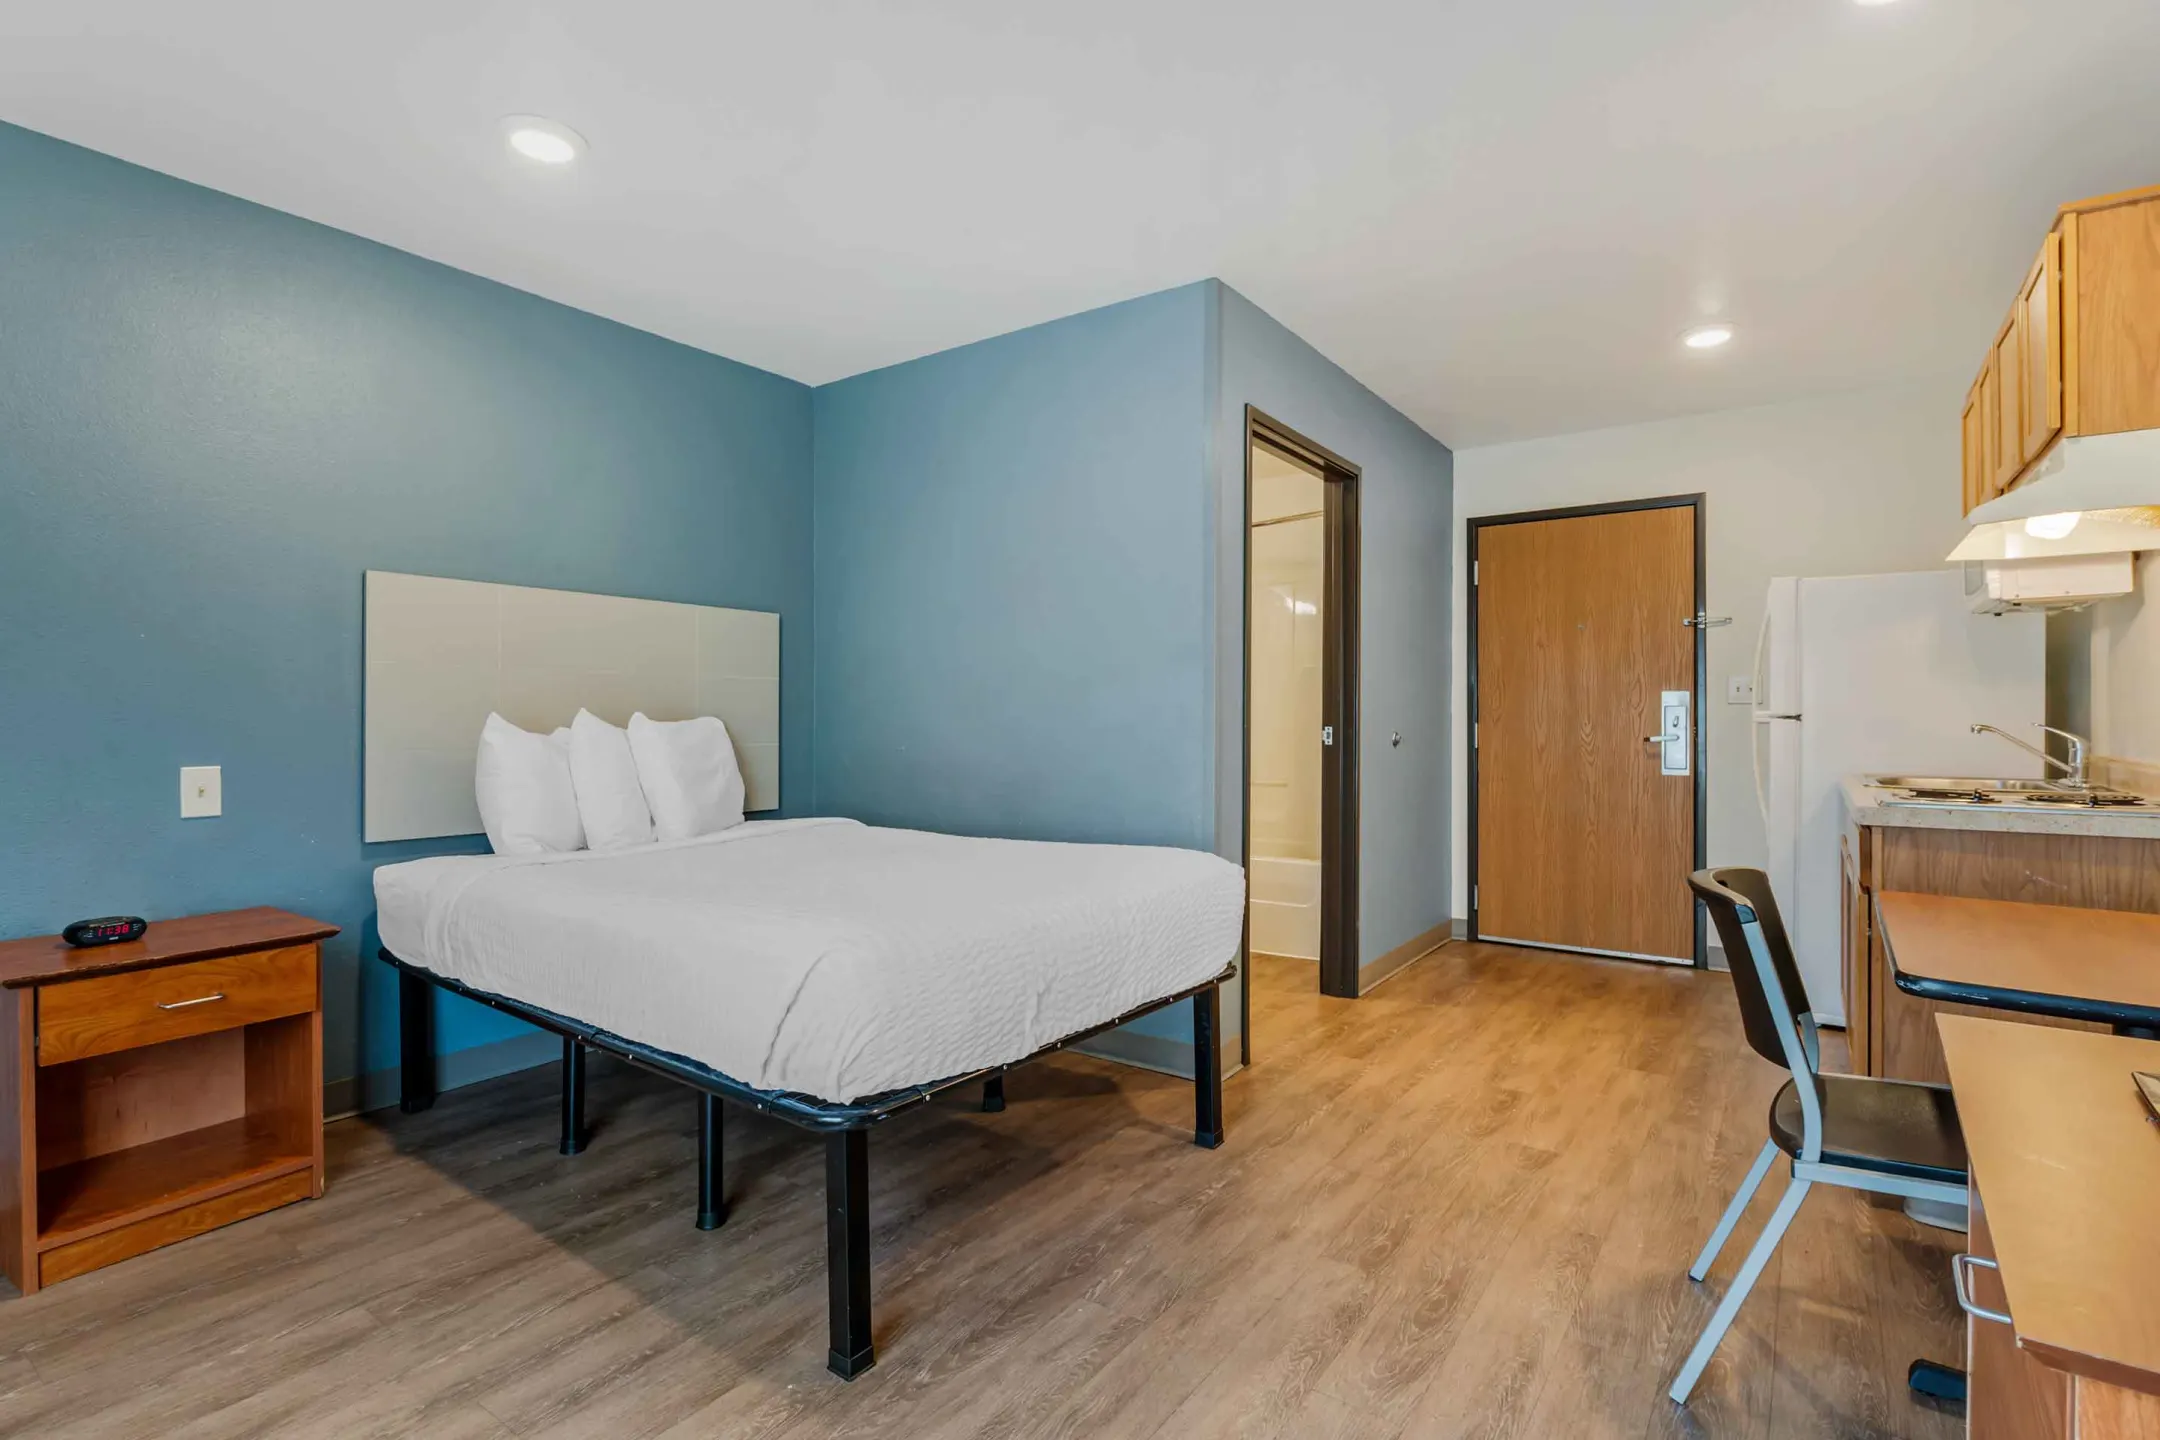 Bedroom - Furnished Studio - Indianapolis - Lawrence - Indianapolis, IN